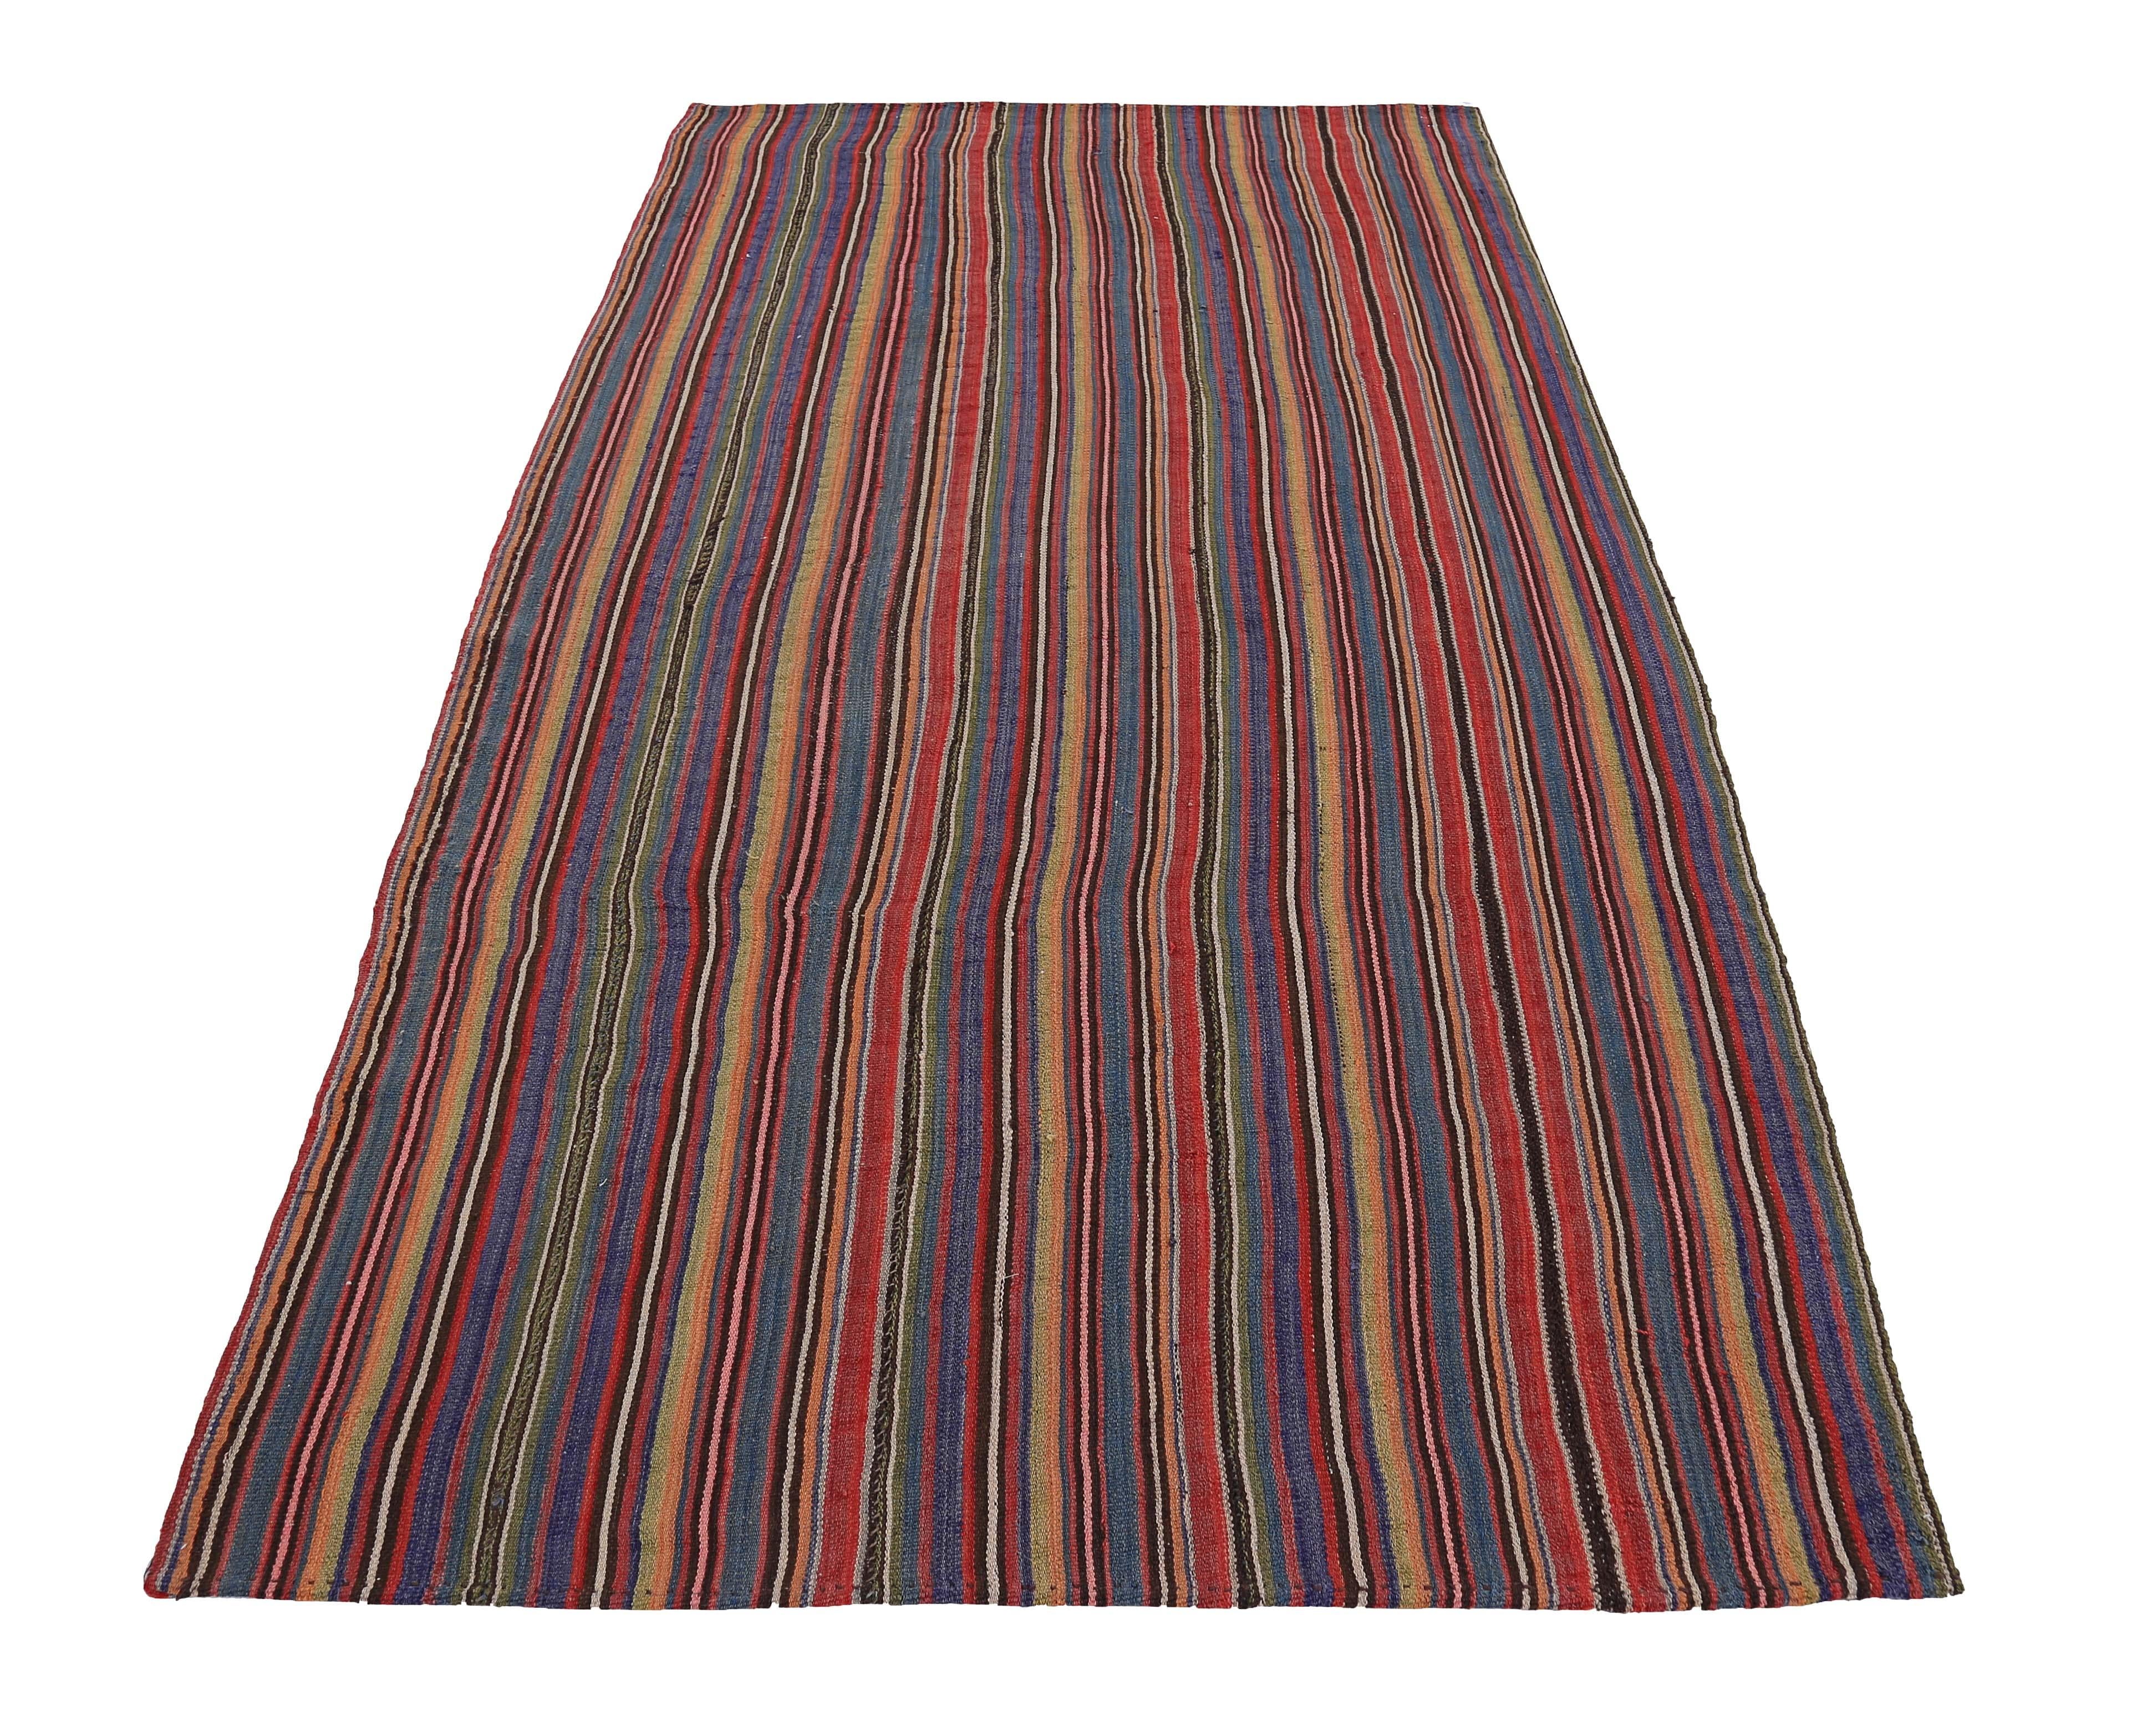 Turkish Kilim rug handwoven from the finest sheep’s wool and colored with all-natural vegetable dyes that are safe for humans and pets. It’s a traditional Kilim flat-weave design featuring red, yellow and blue pencil stripes. It’s a stunning piece